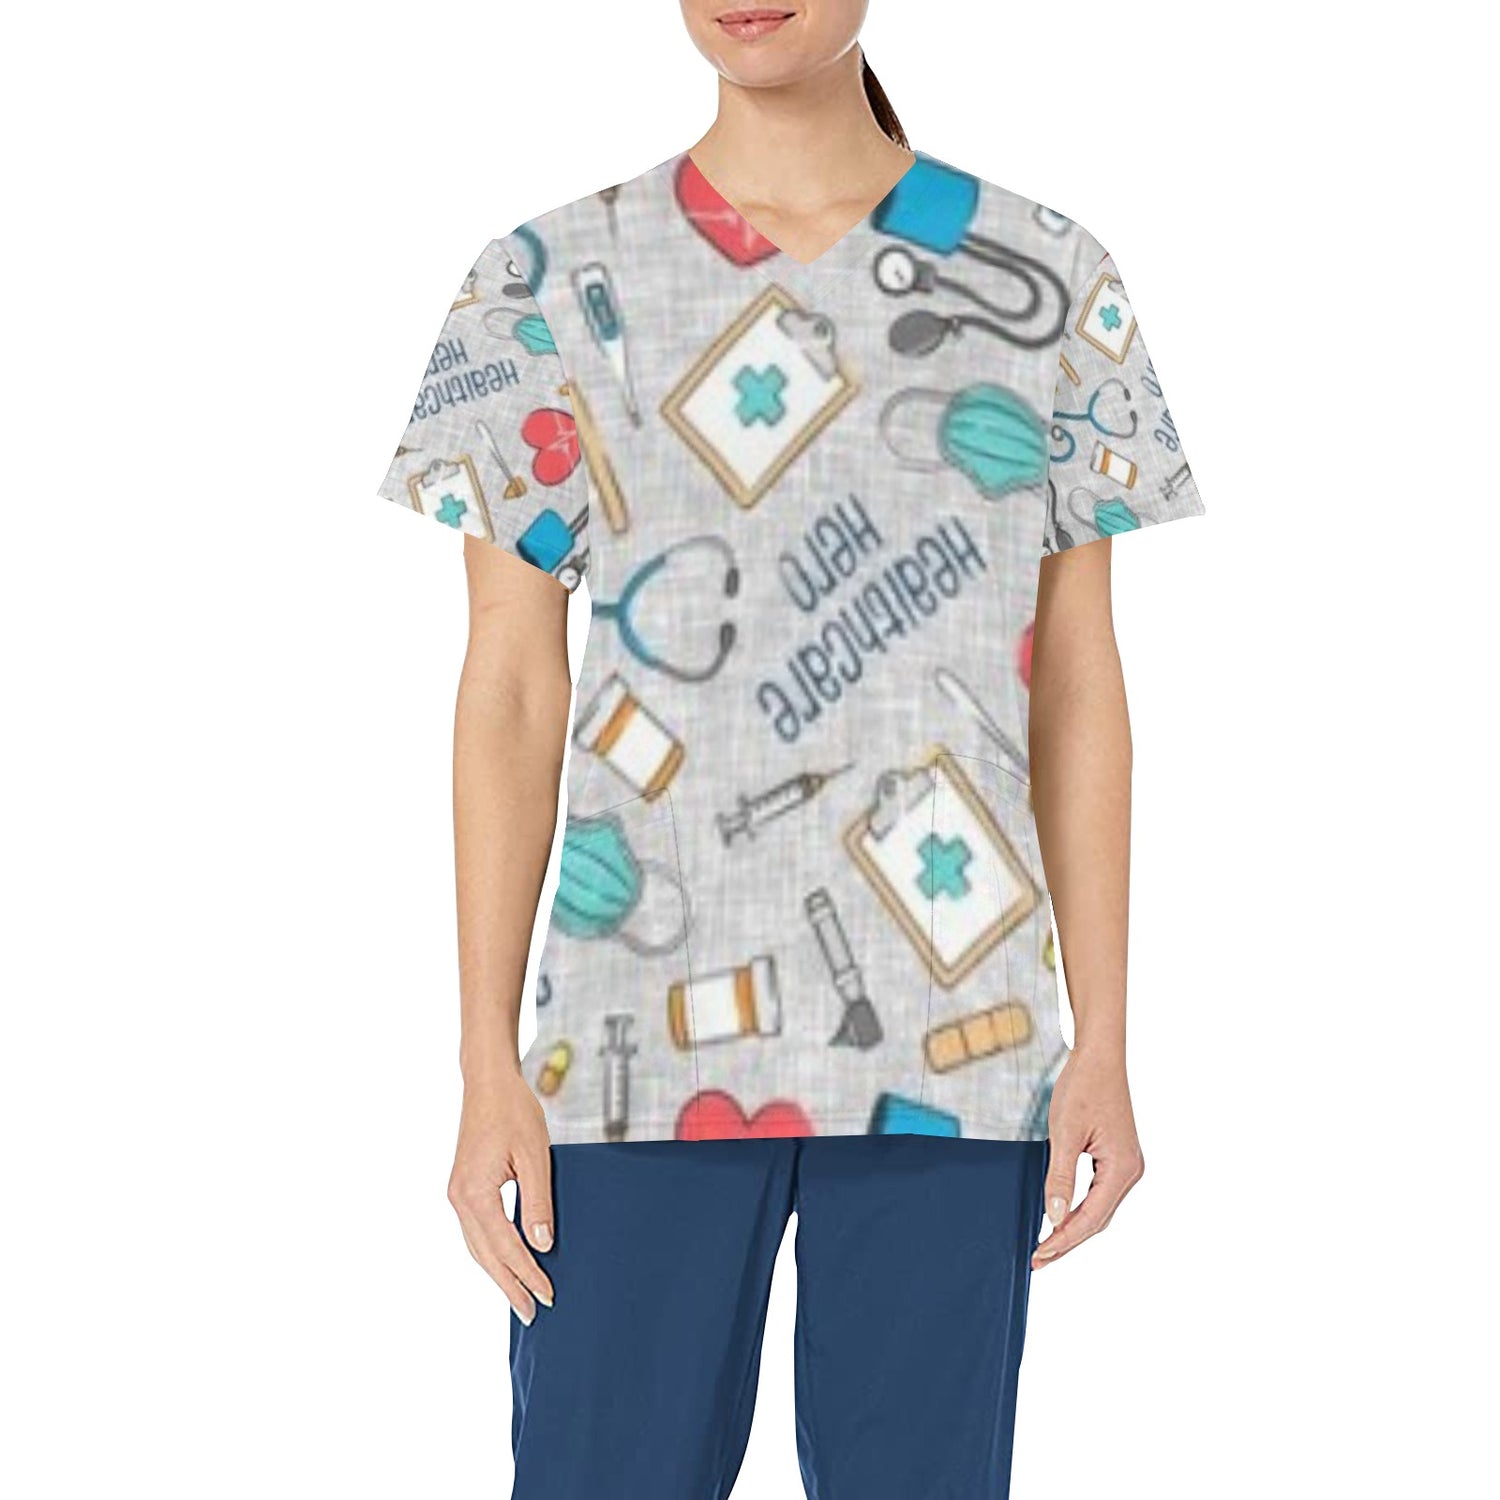 Top Quality Design Your Own Scrubs For Every Purpose 